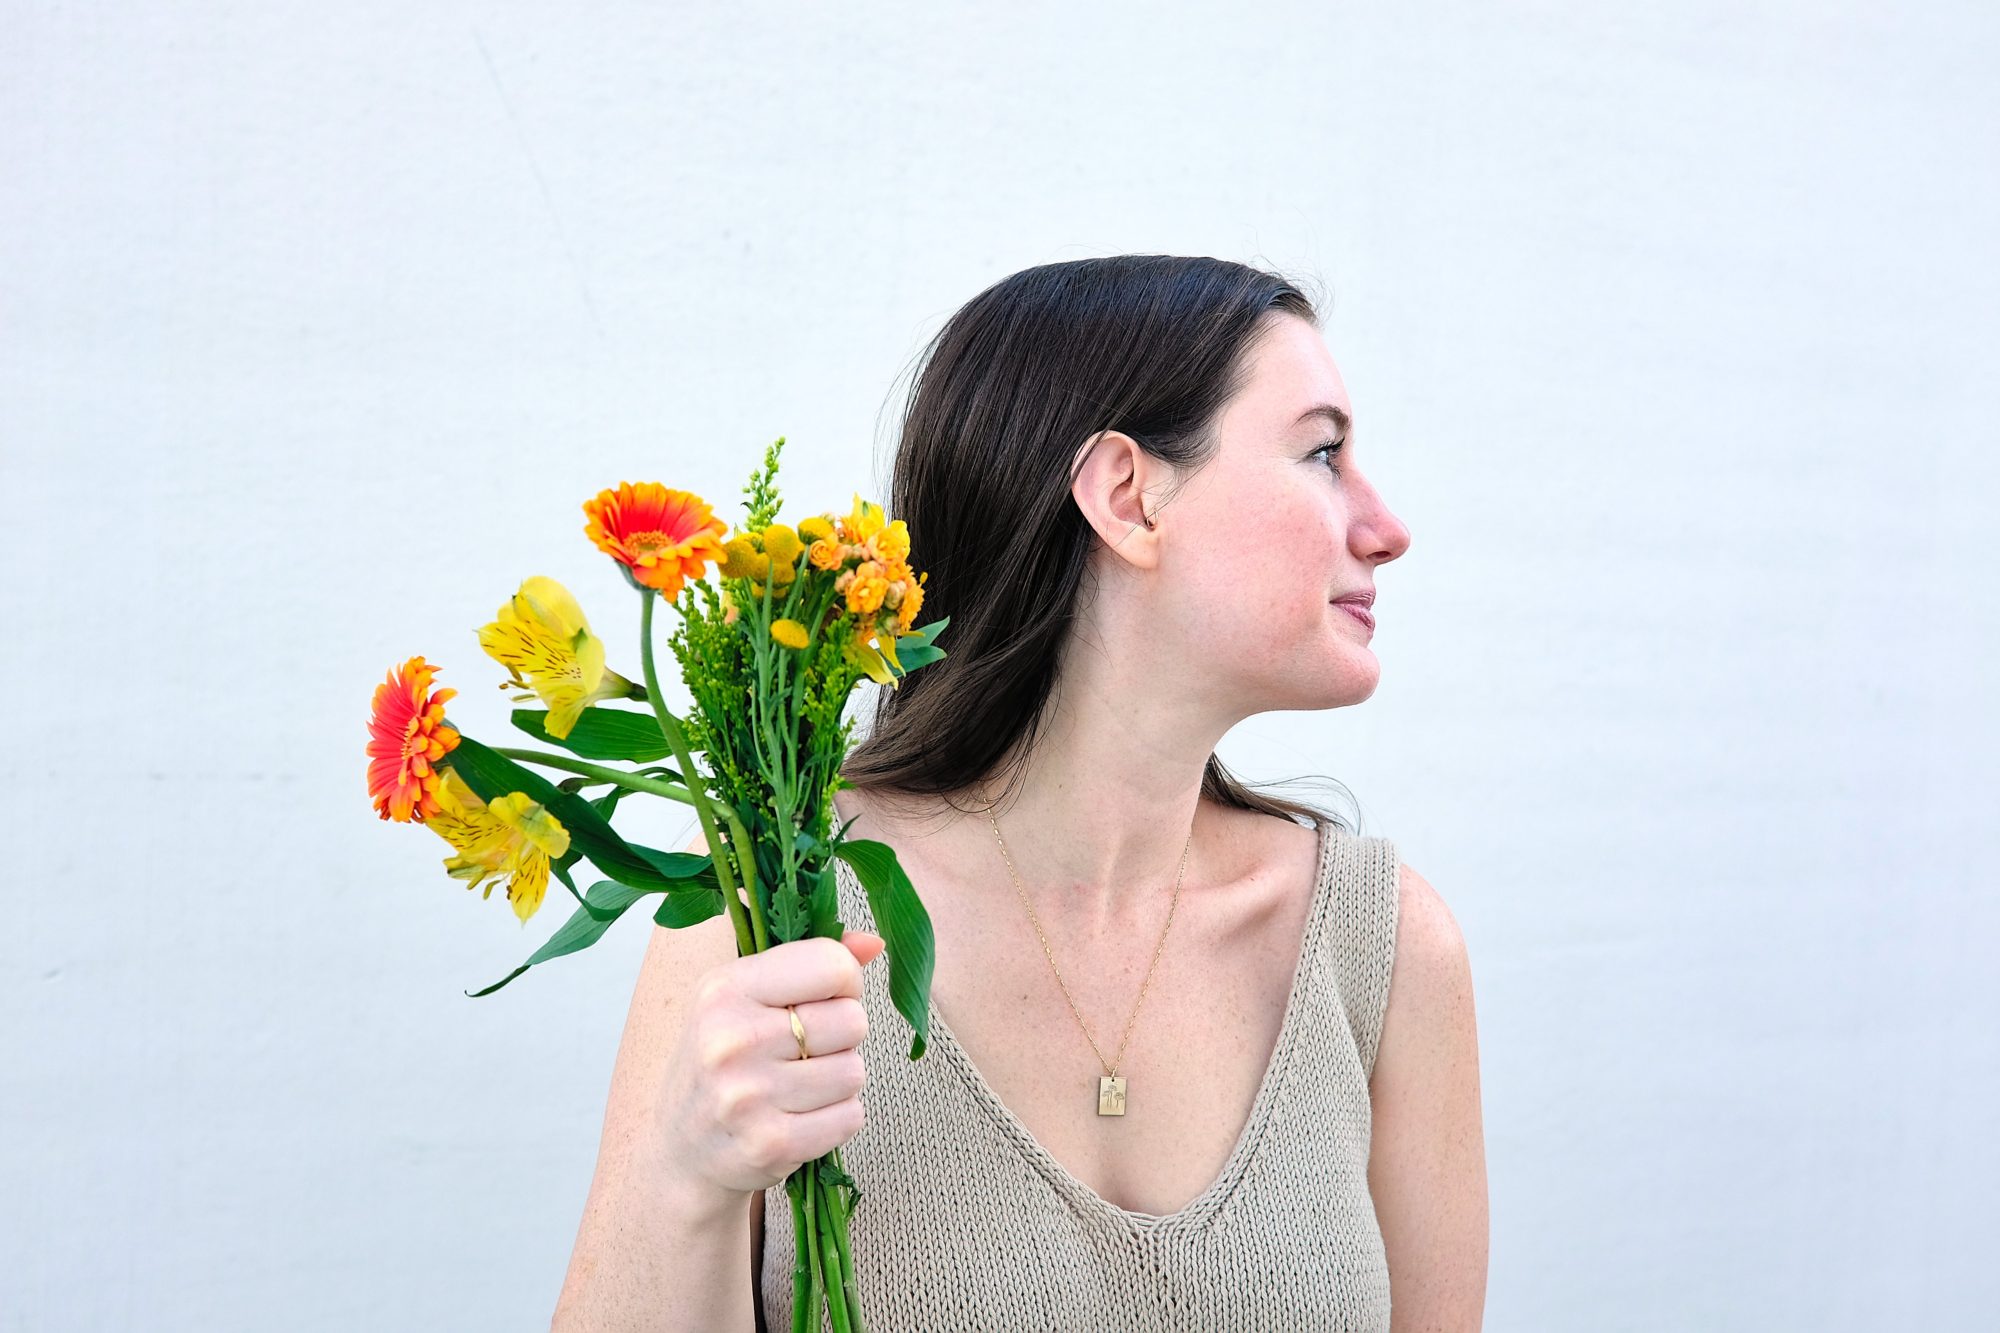 Alyssa holds a bouquet of flowers while wearing GLDN jewelry and looks away from the camera